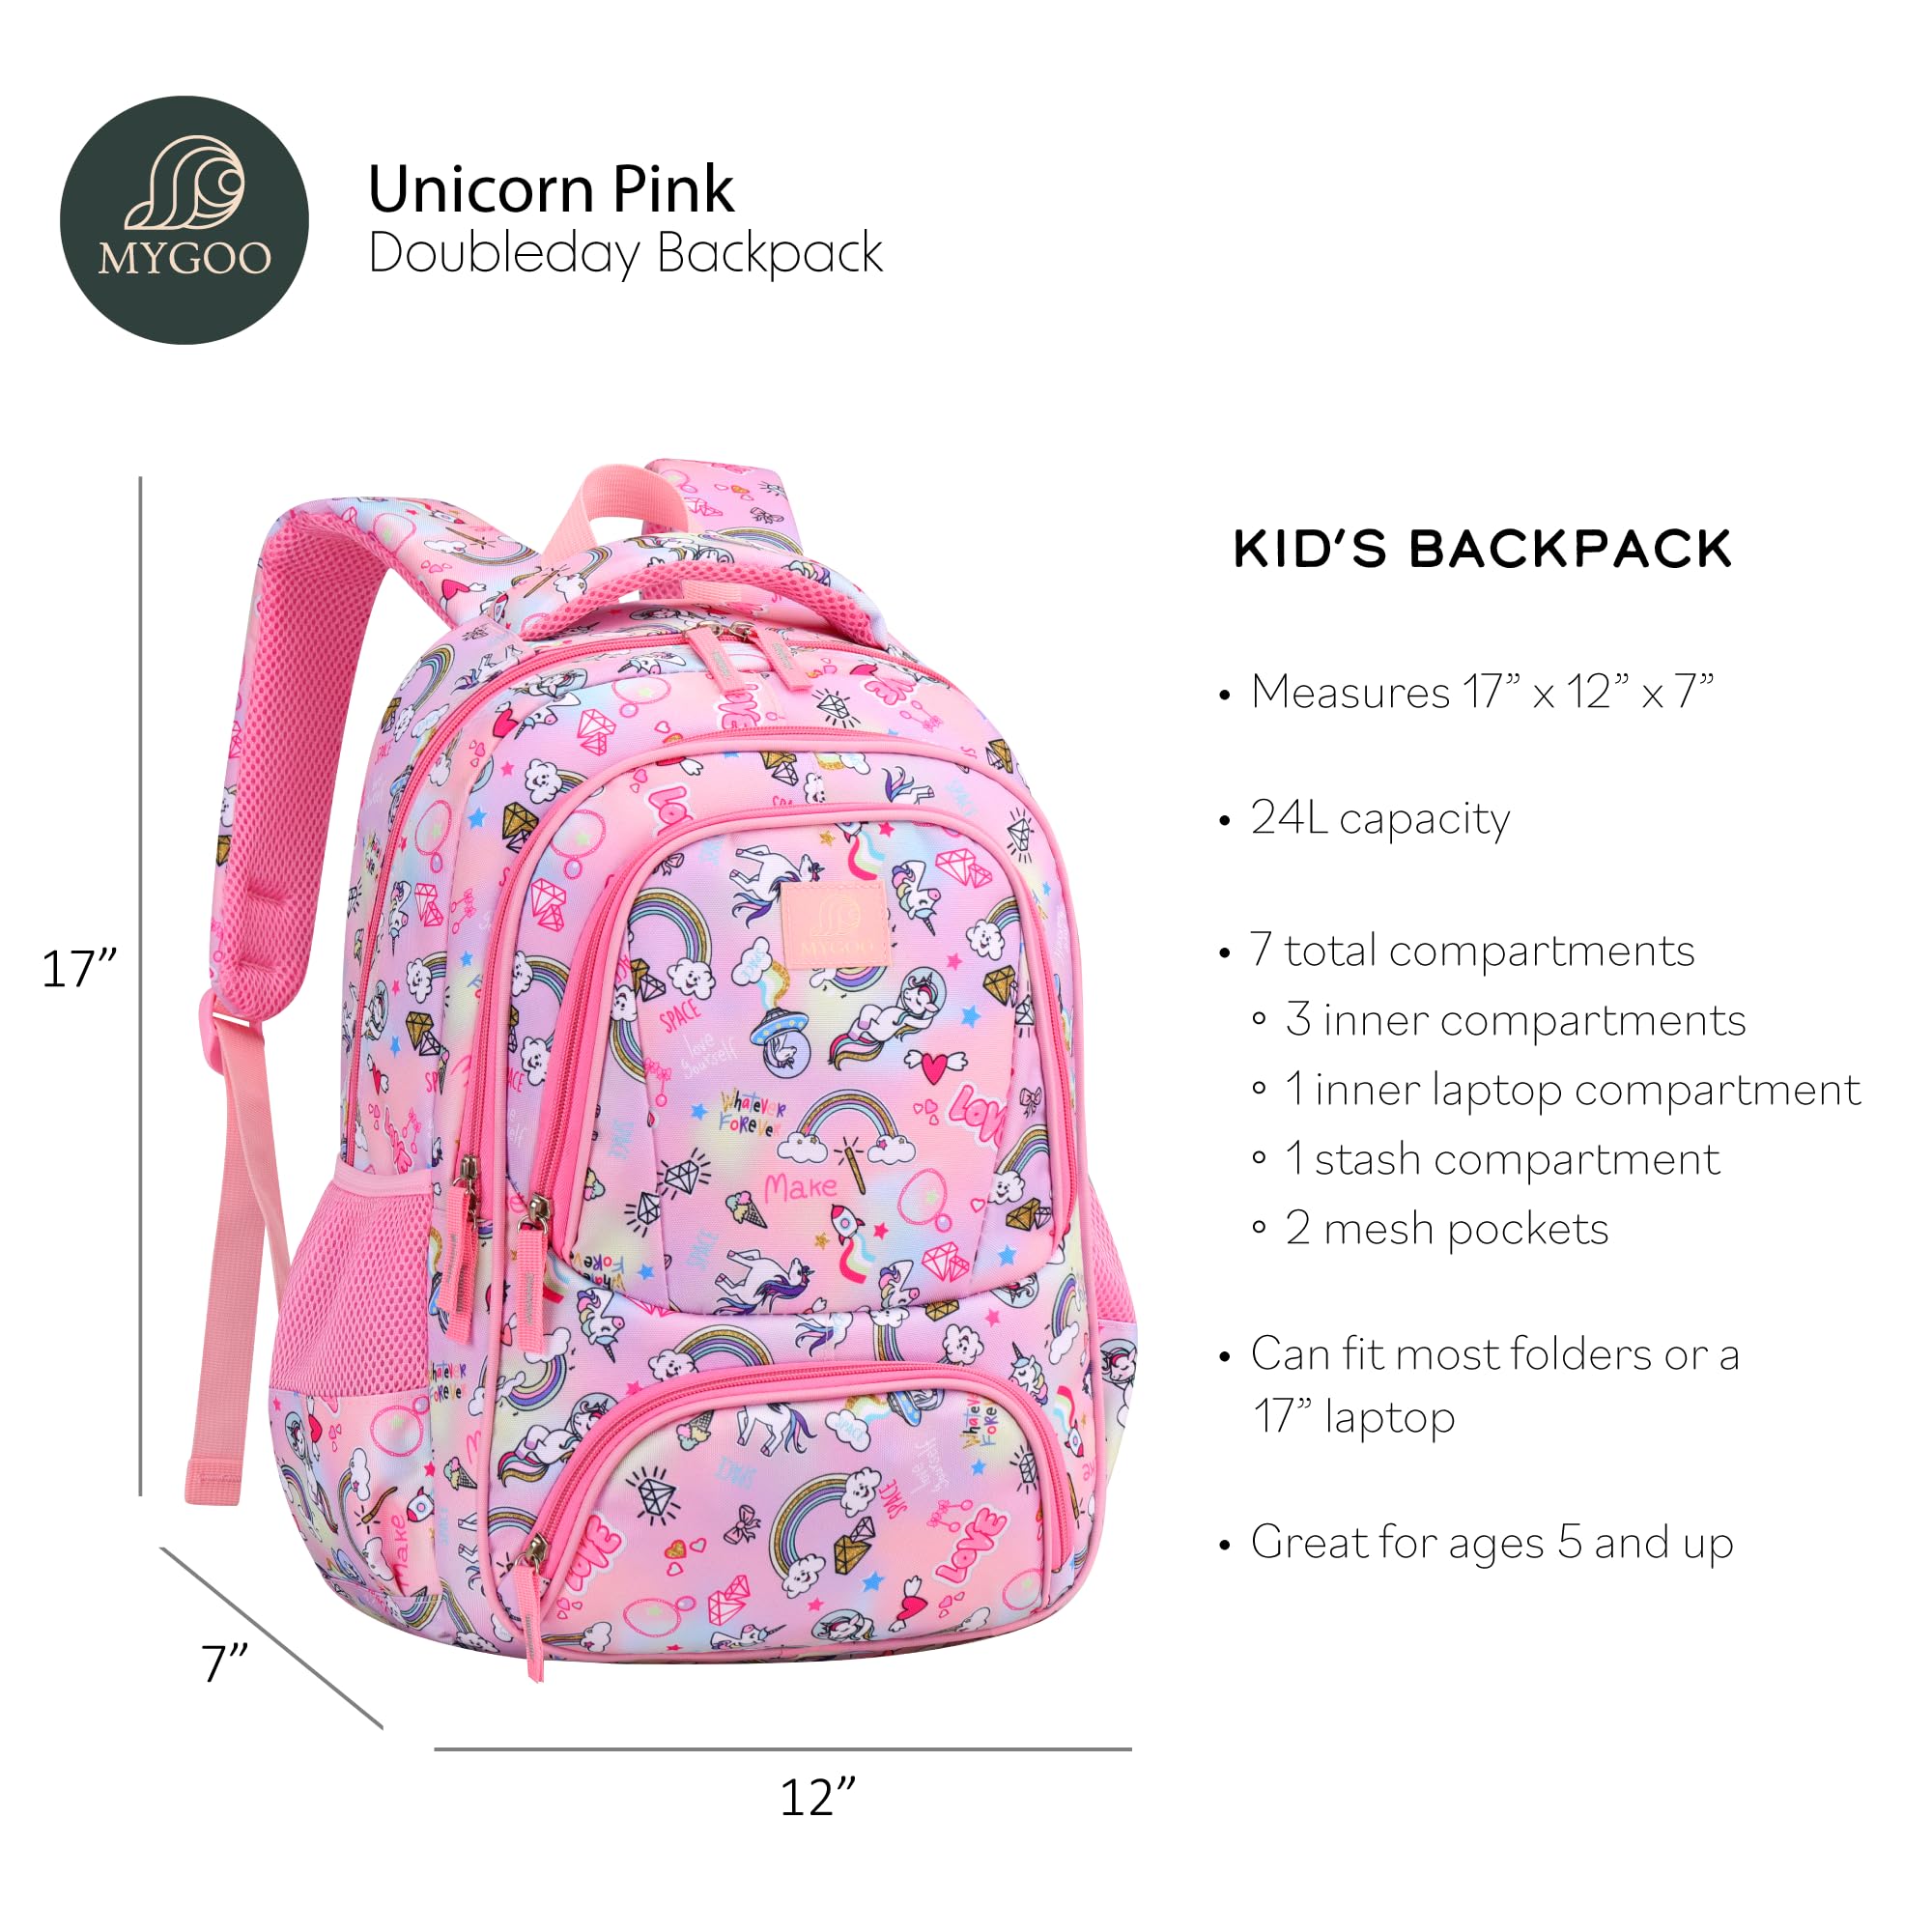 MYGOO Elementary School Backpack for Girls | Doubleday Collection | 17" Unicon Pink Design | Tailored for Young Teens